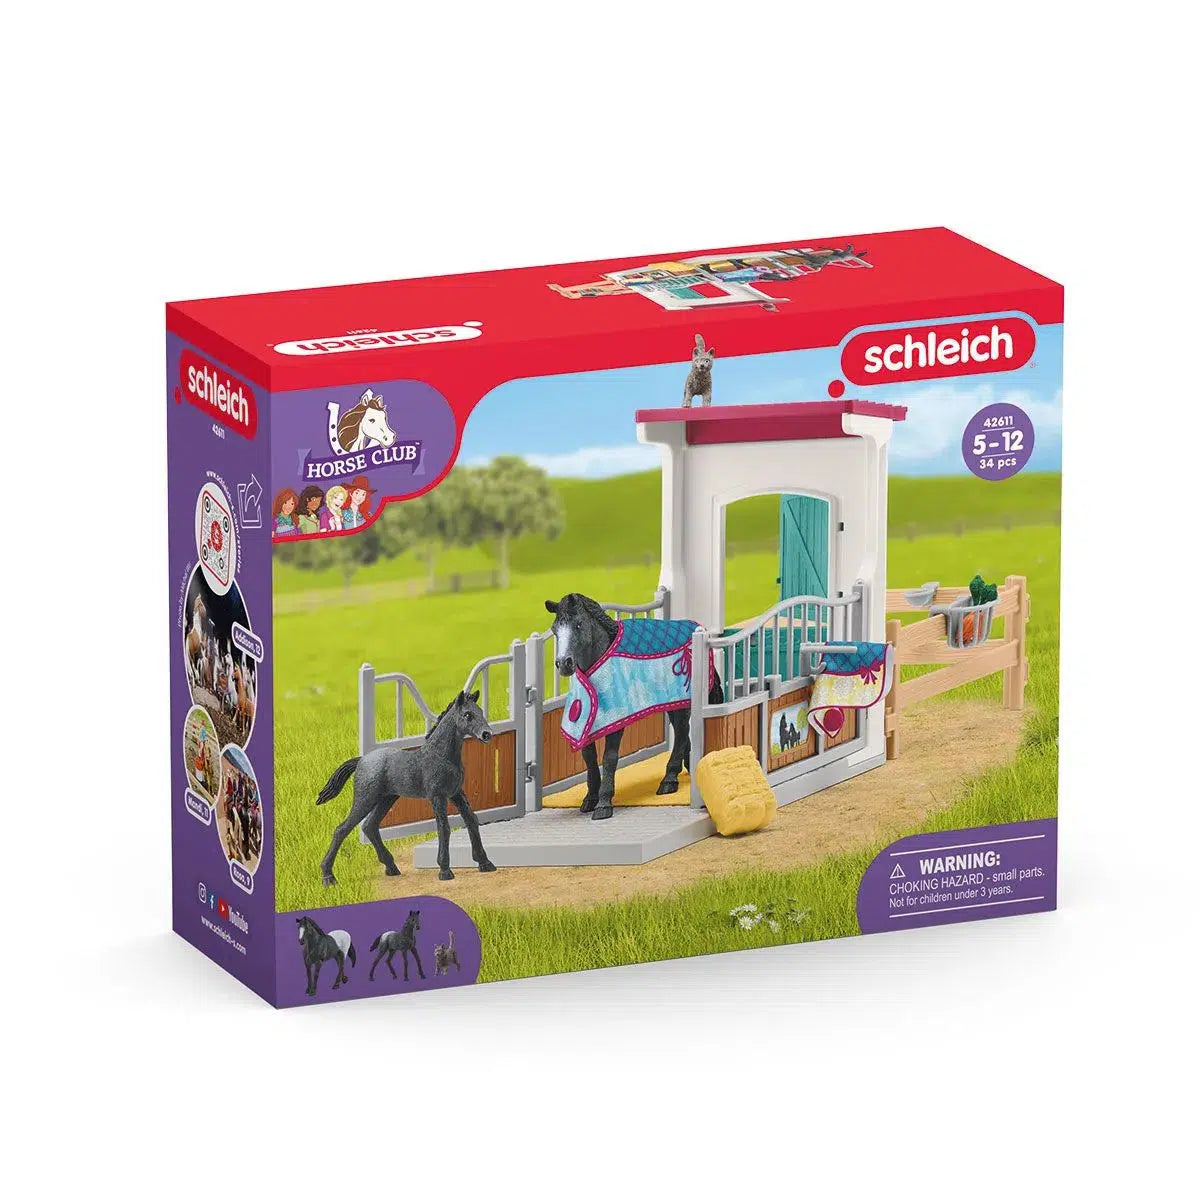 Schleich-Horse Box with Mare and Foal-42611-Legacy Toys